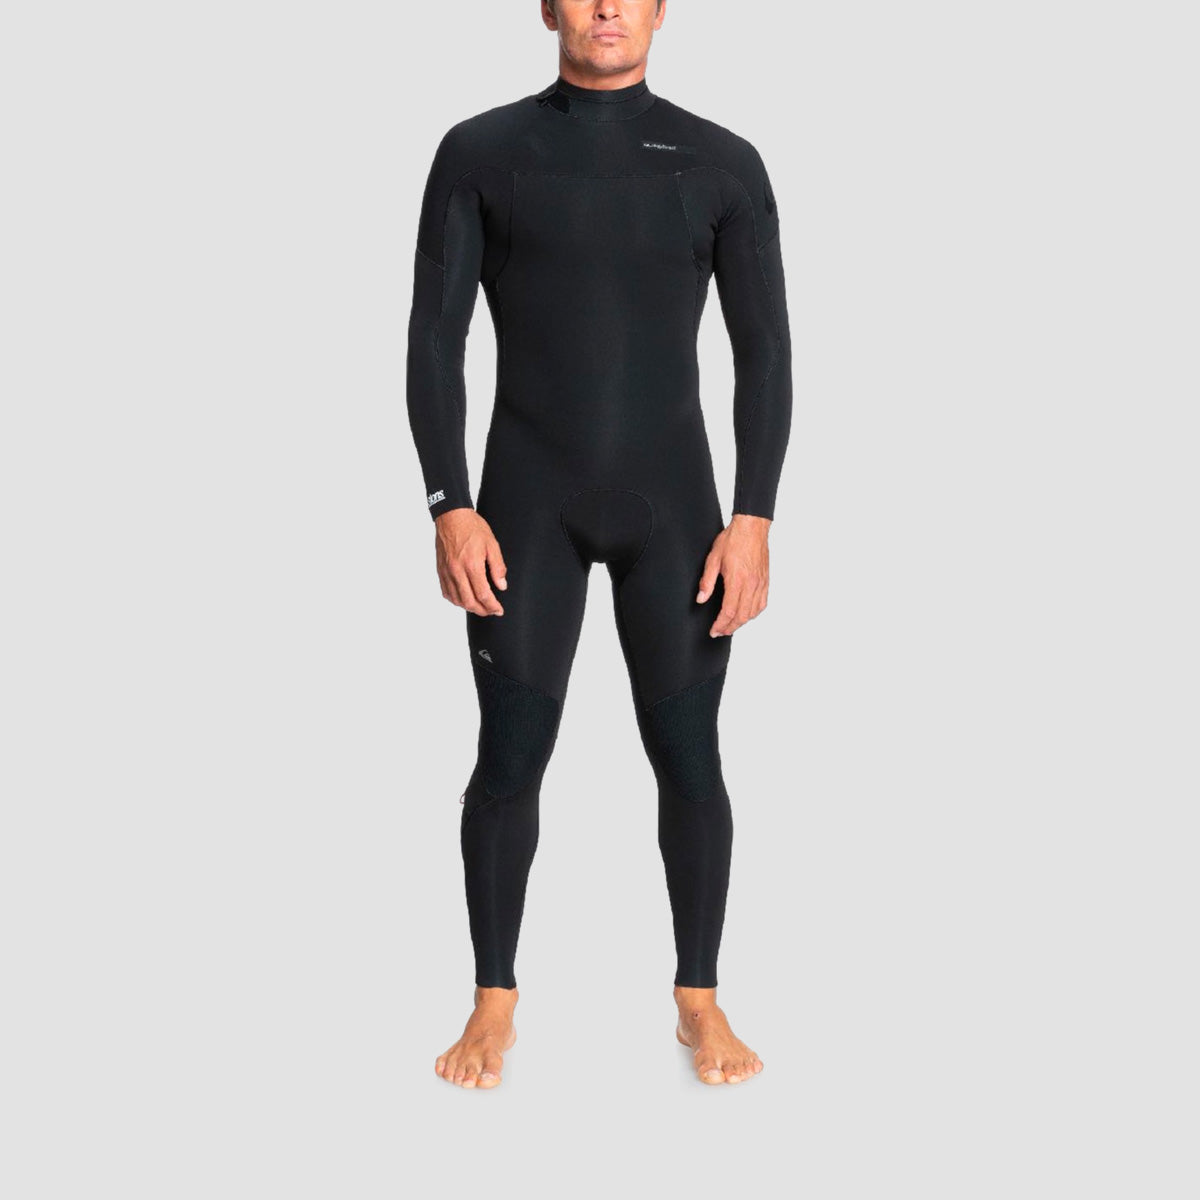 Quiksilver Everyday Sessions 4/3mm Back Zip Wetsuit Black